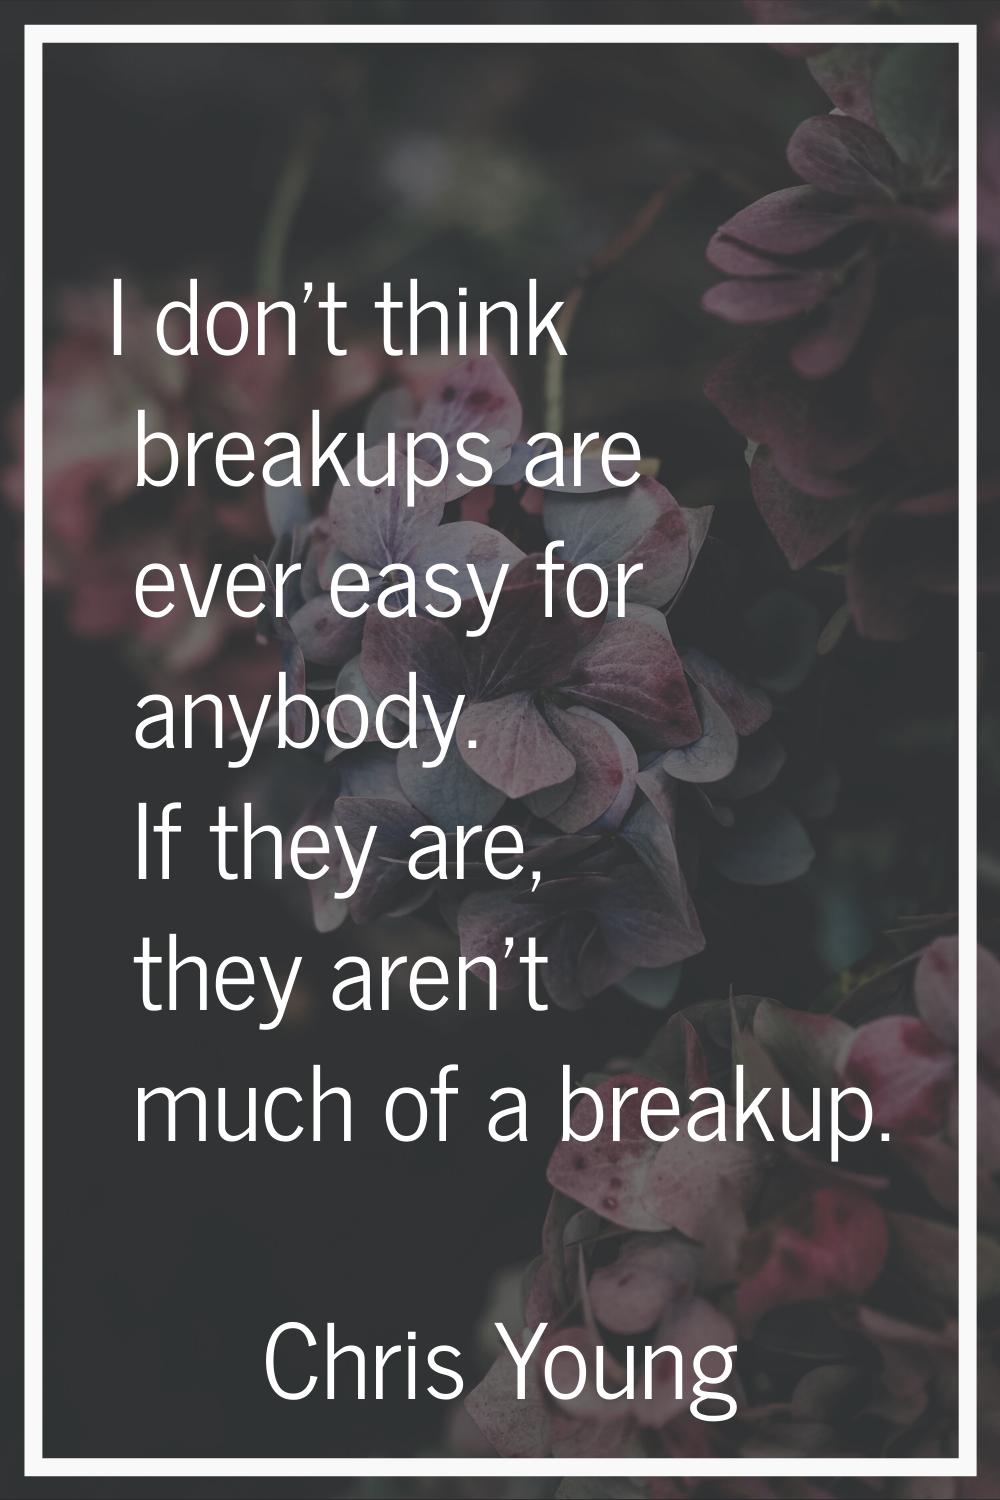 I don't think breakups are ever easy for anybody. If they are, they aren't much of a breakup.